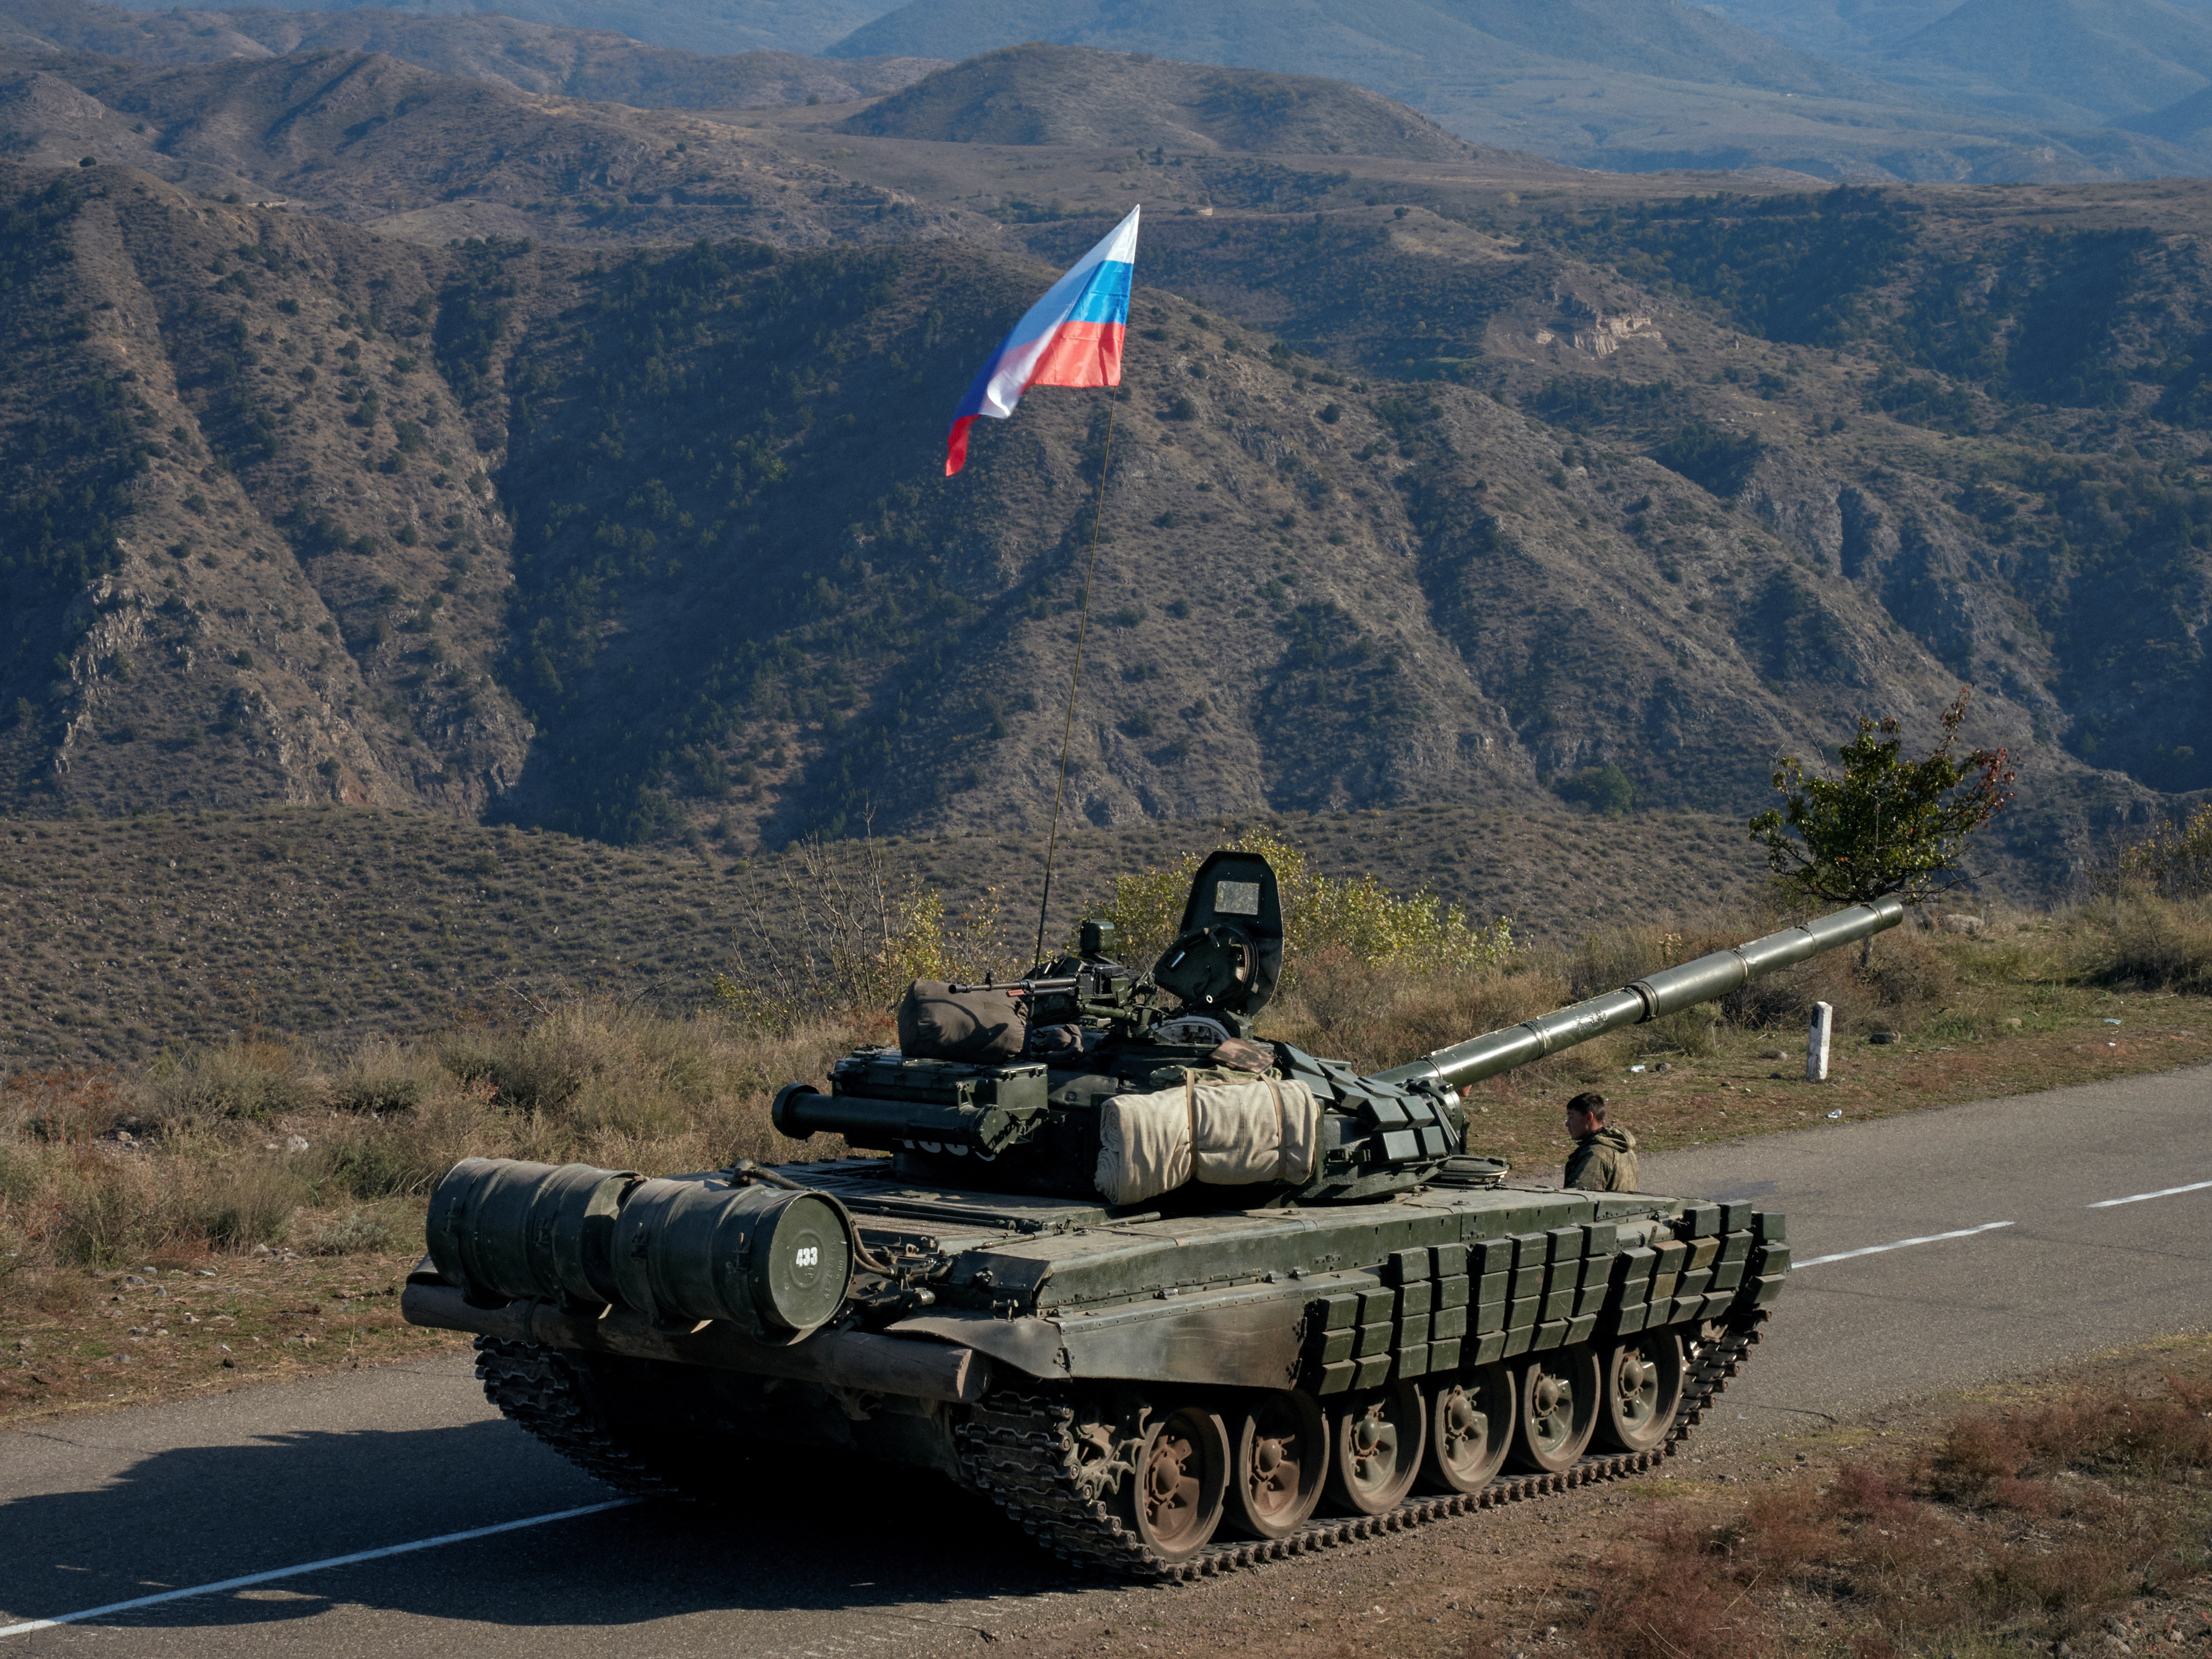 Russia to Assist Armenia With Military Reform Following Karabakh Conflict -  The Moscow Times